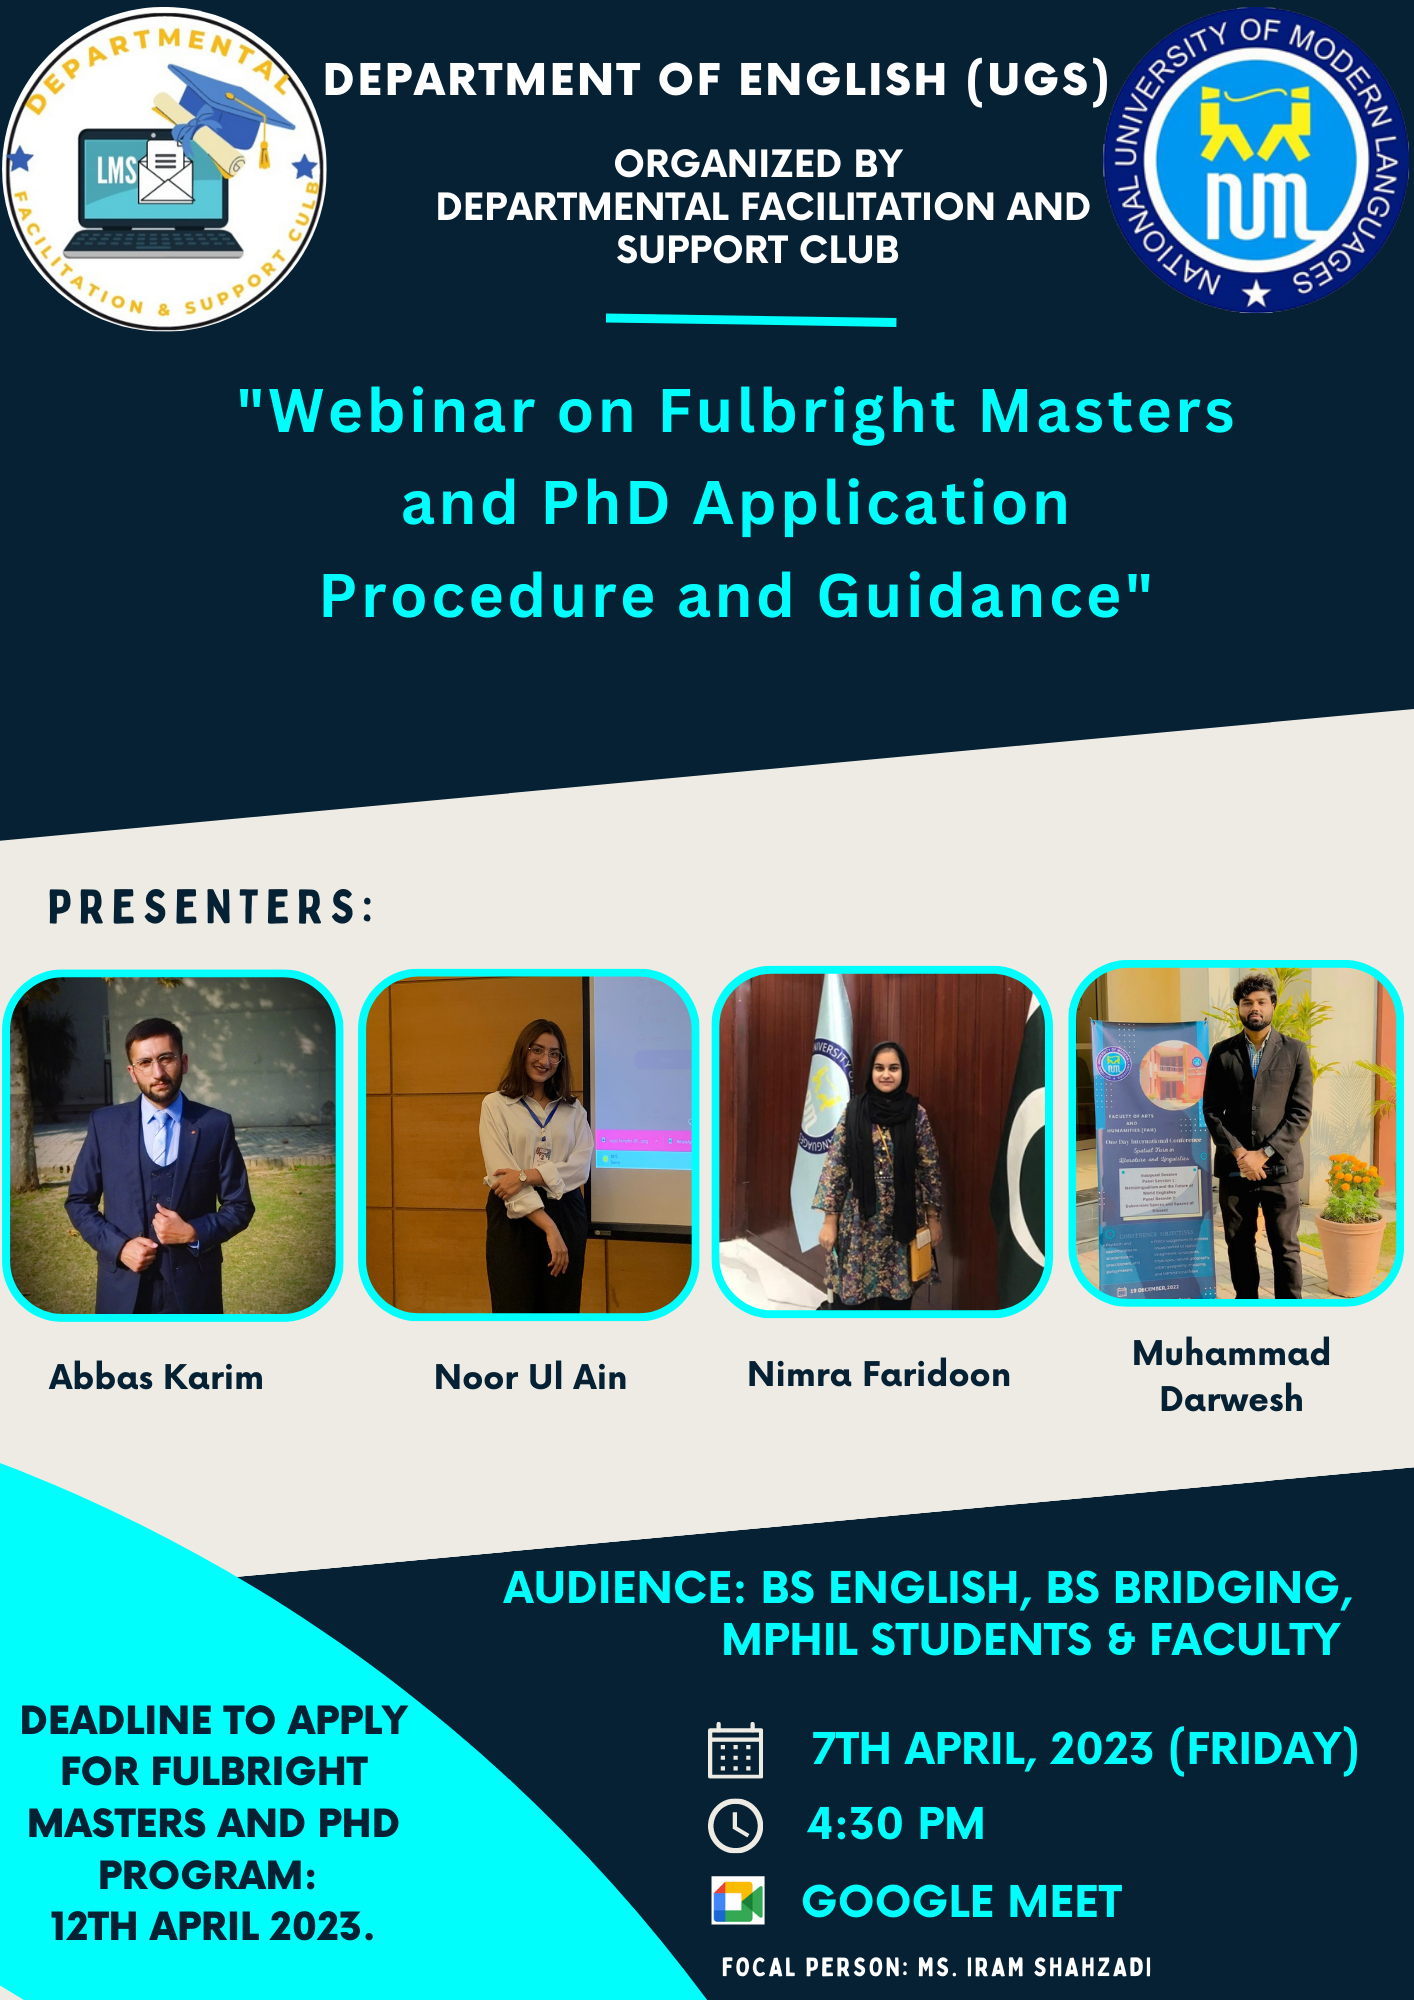 Webinar on Fulbright Masters and PhD Application Procedure and Guidance by Departmental Facilitation & Support Club (DFSC) on 7th April